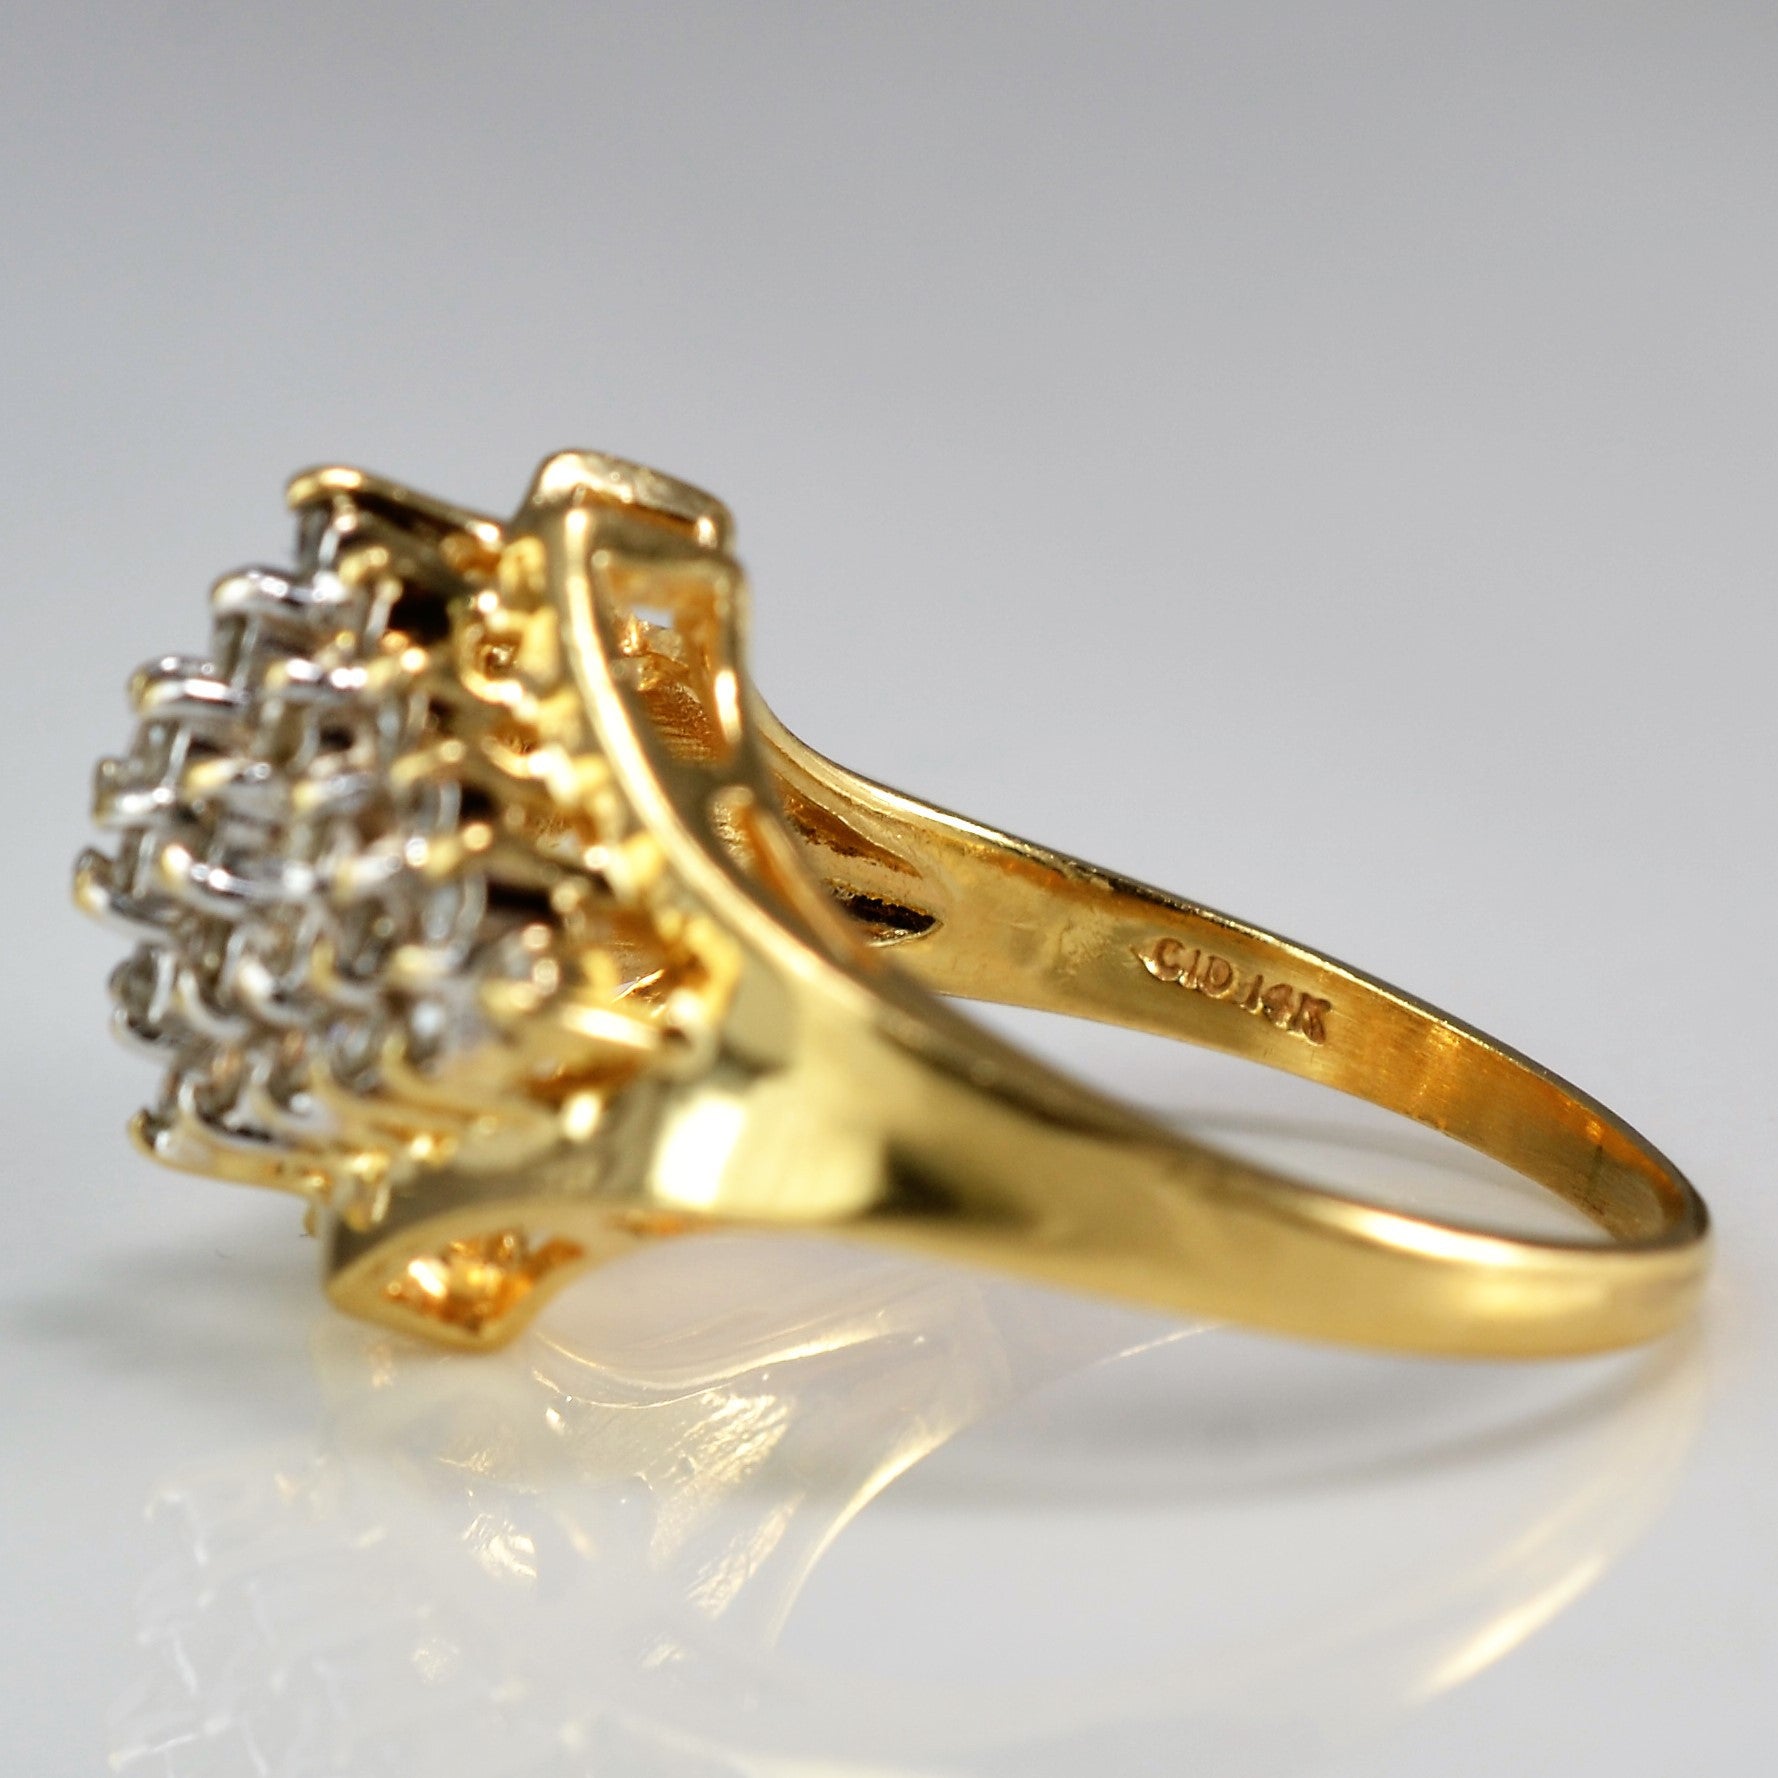 High Set Cluster Cocktail Ring | 0.50 ctw, SZ 6.25 |